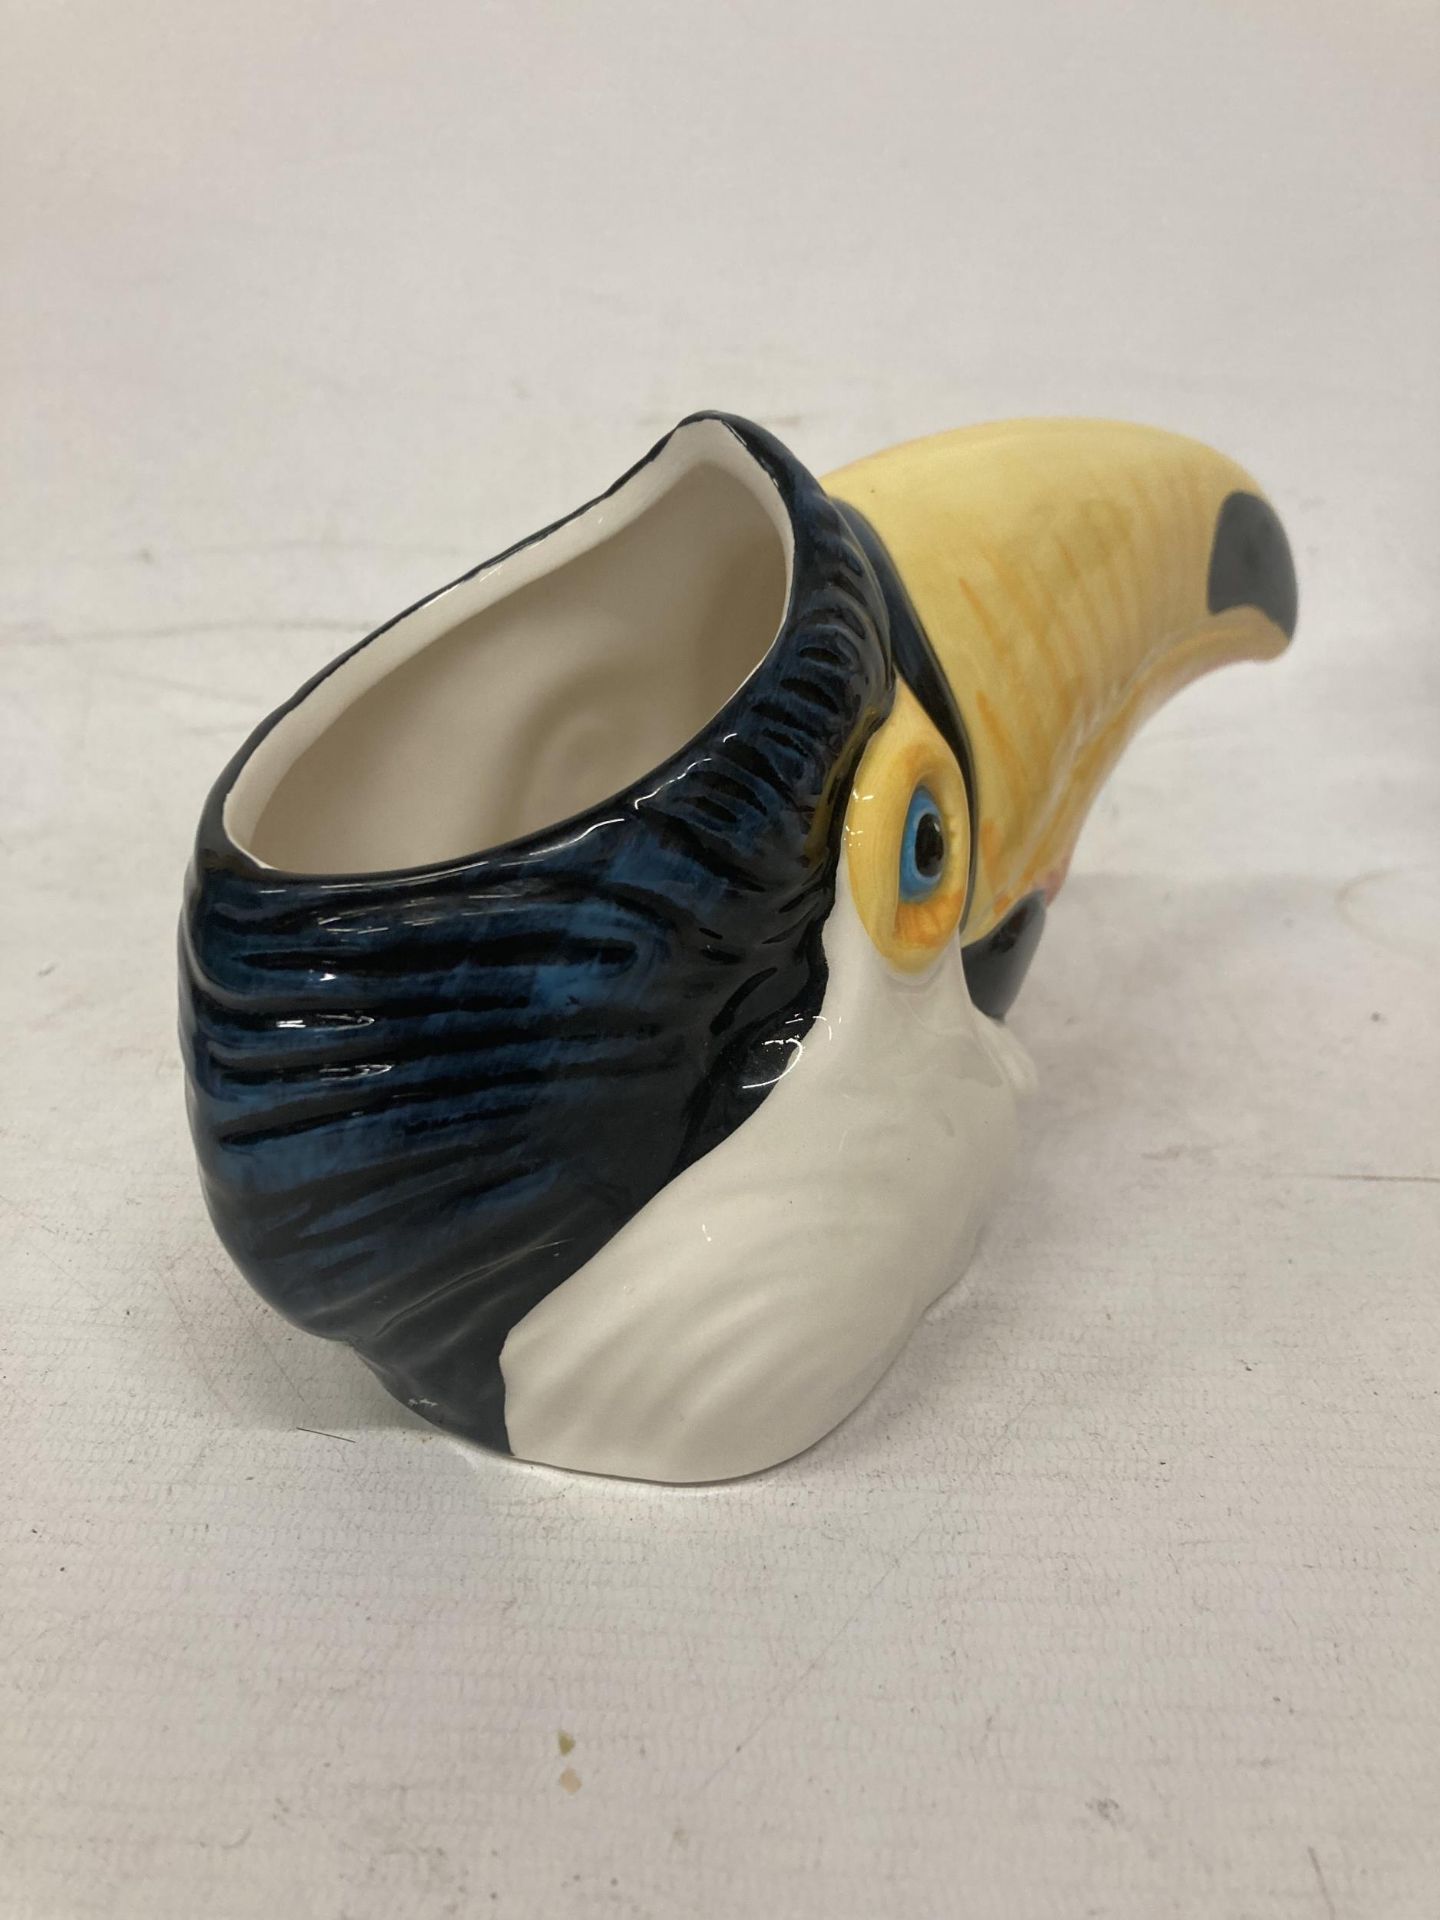 A TOUCAN HEAD BY DRAGONFLY MANUFACTURING DESIGNED BY JACK GRAHAM - Image 3 of 4